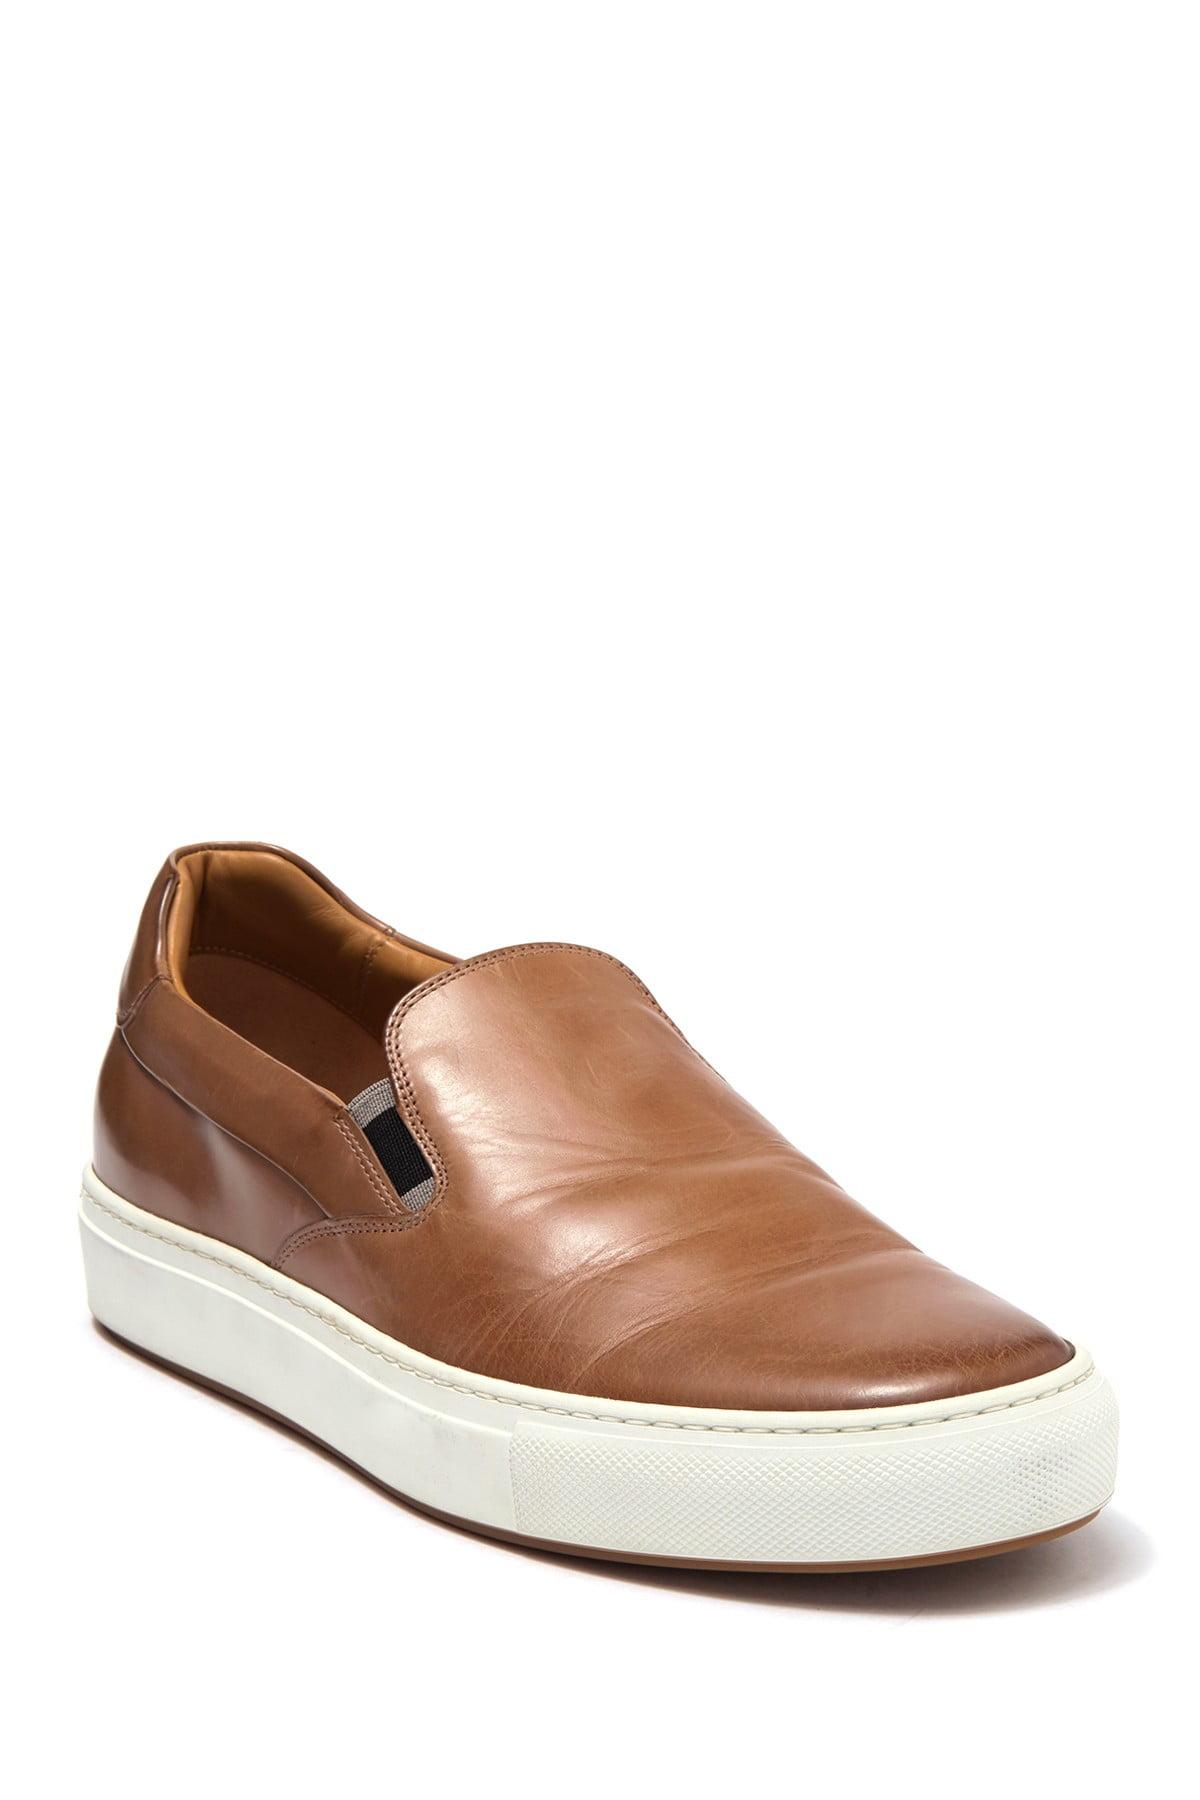 BOSS by HUGO BOSS Italian-made Slip-on Sneakers In Burnished Leather for -